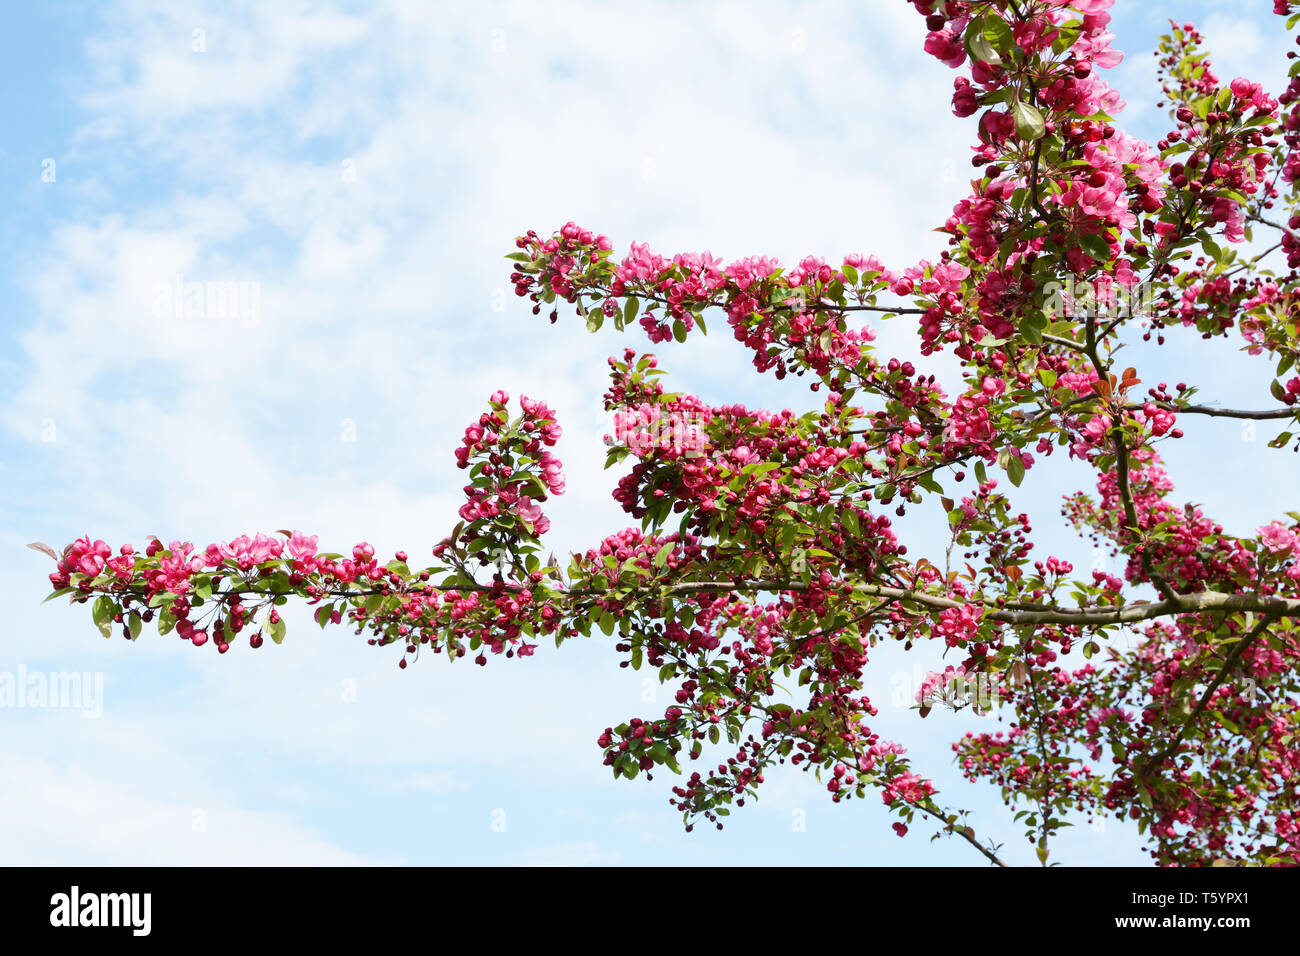 Branches of a crab apple tree covered in abundant deep pink blossom criss-cross against a cloudy blue sky Stock Photo